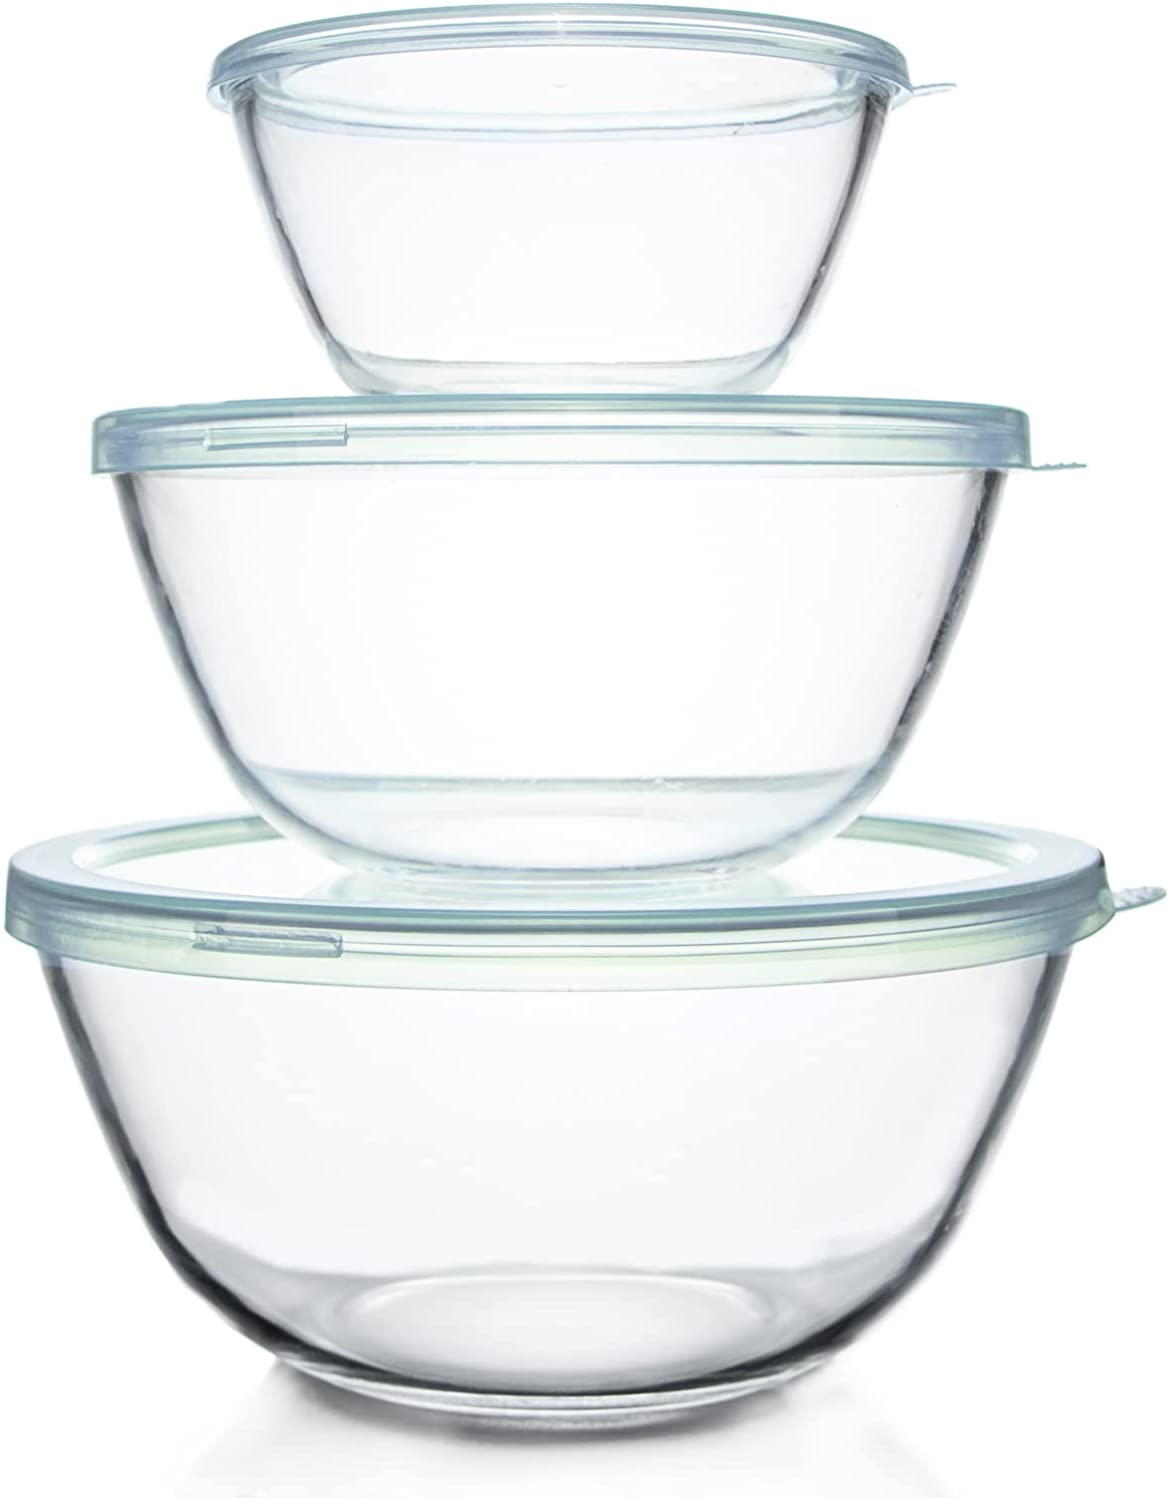 Nesting Microwave Bowls with Clear Lids, set of 3 